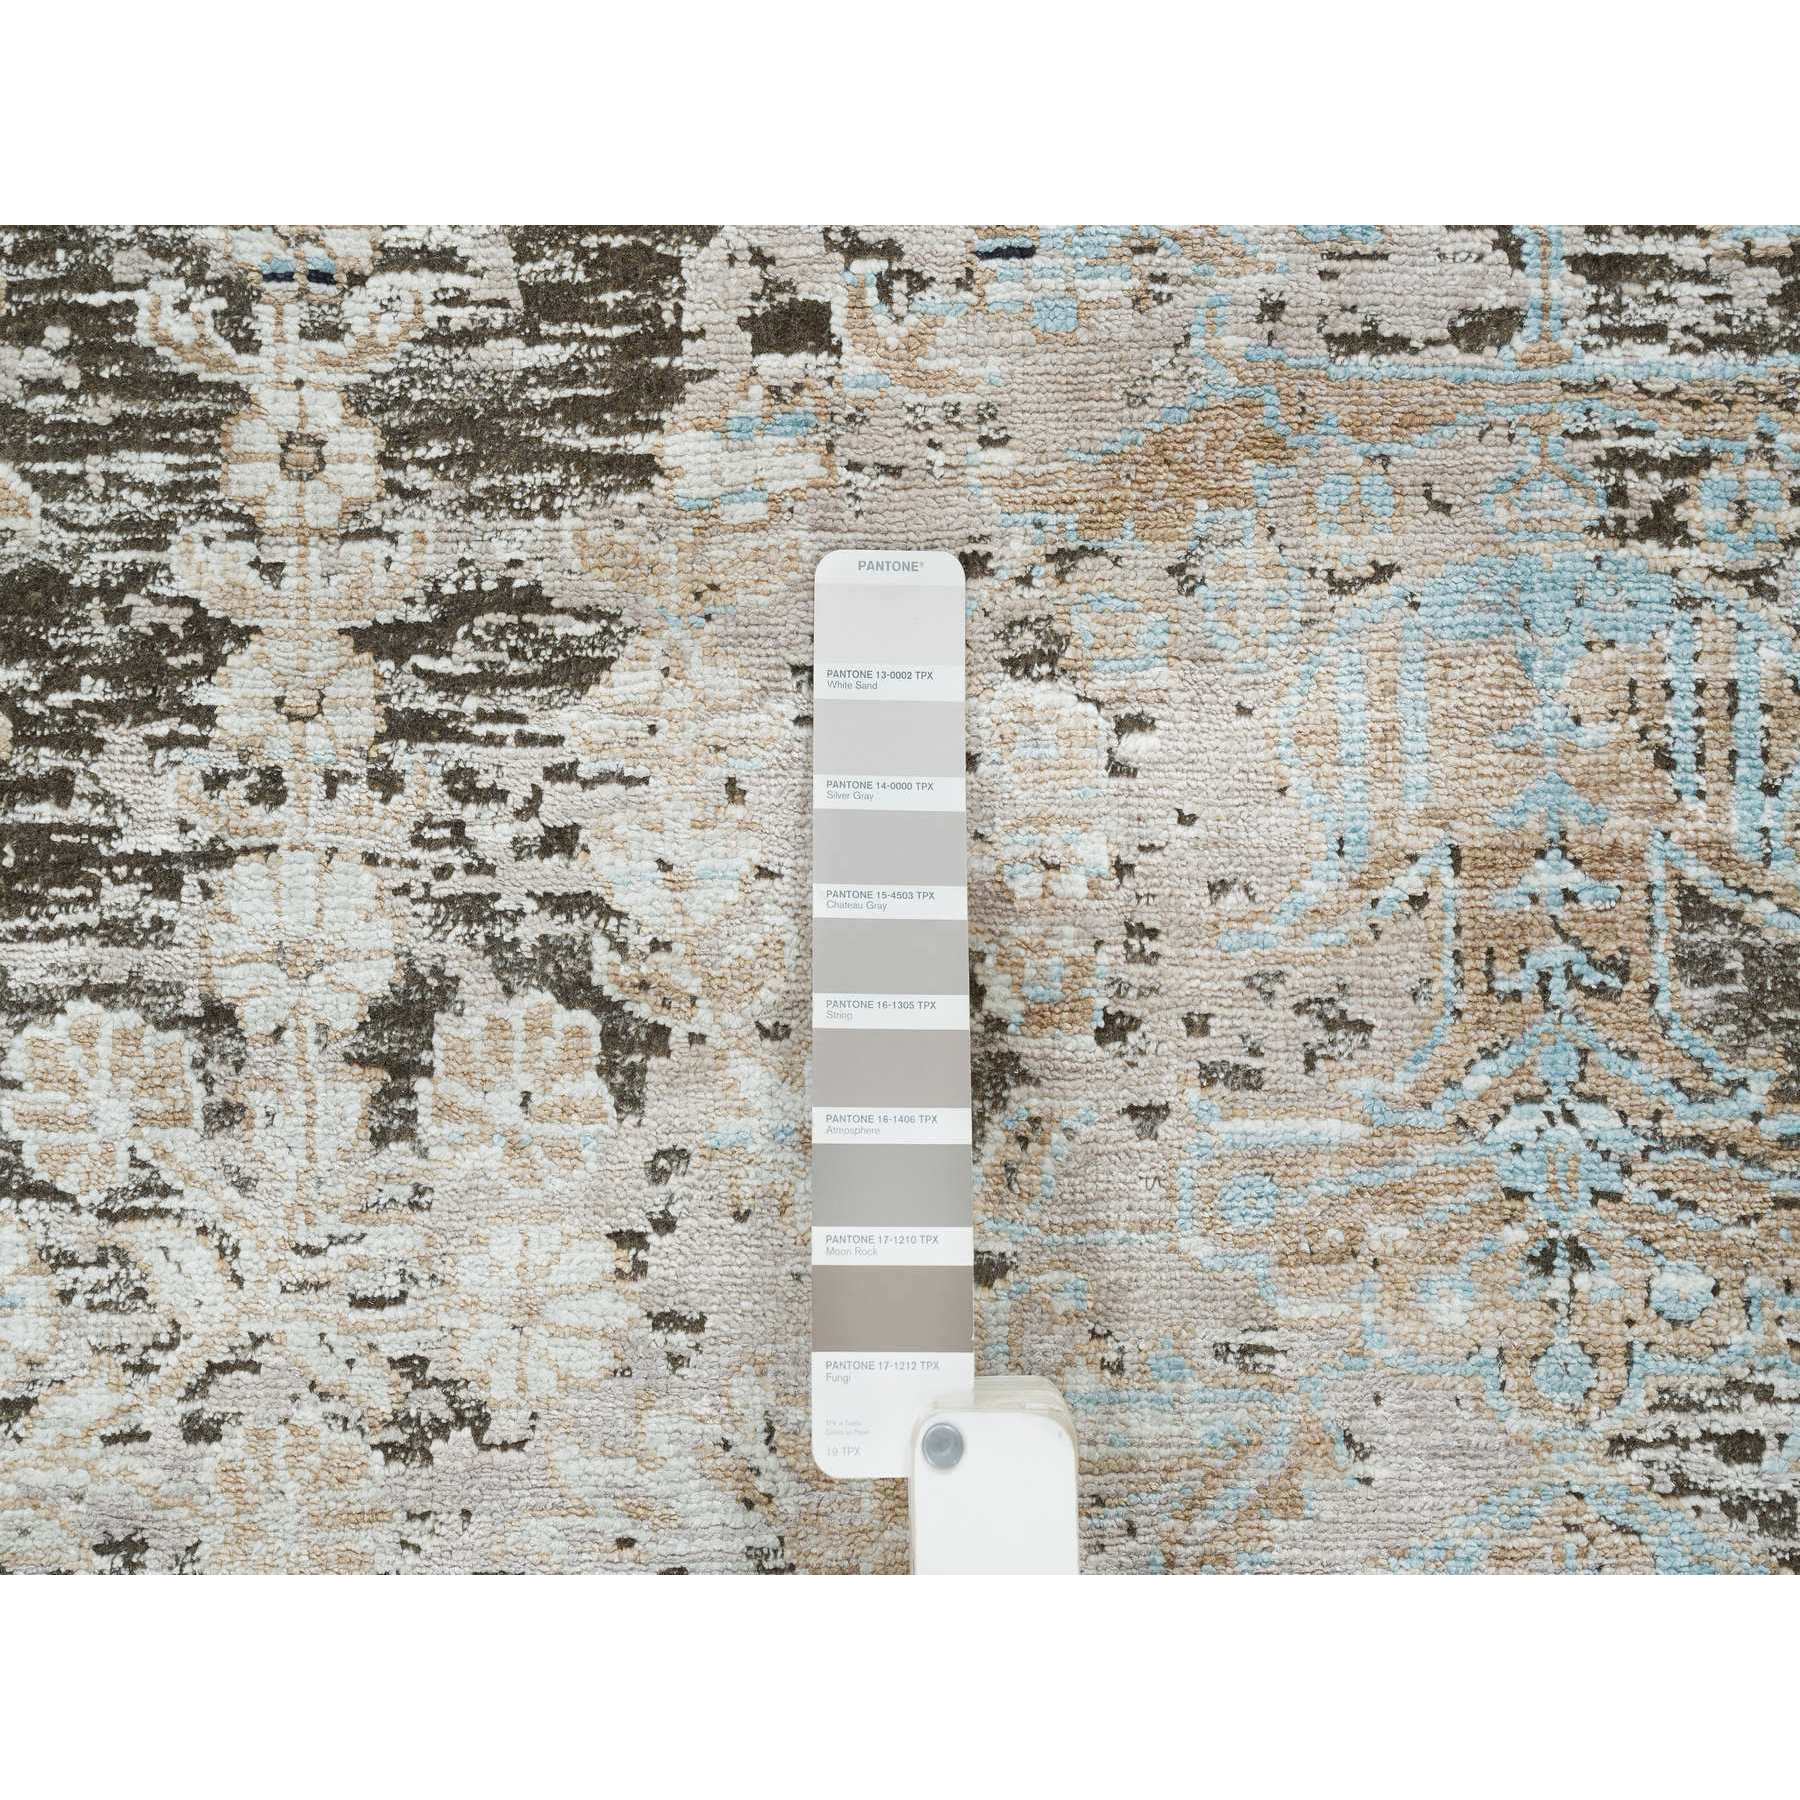  Silk Hand-Knotted Area Rug 8'3